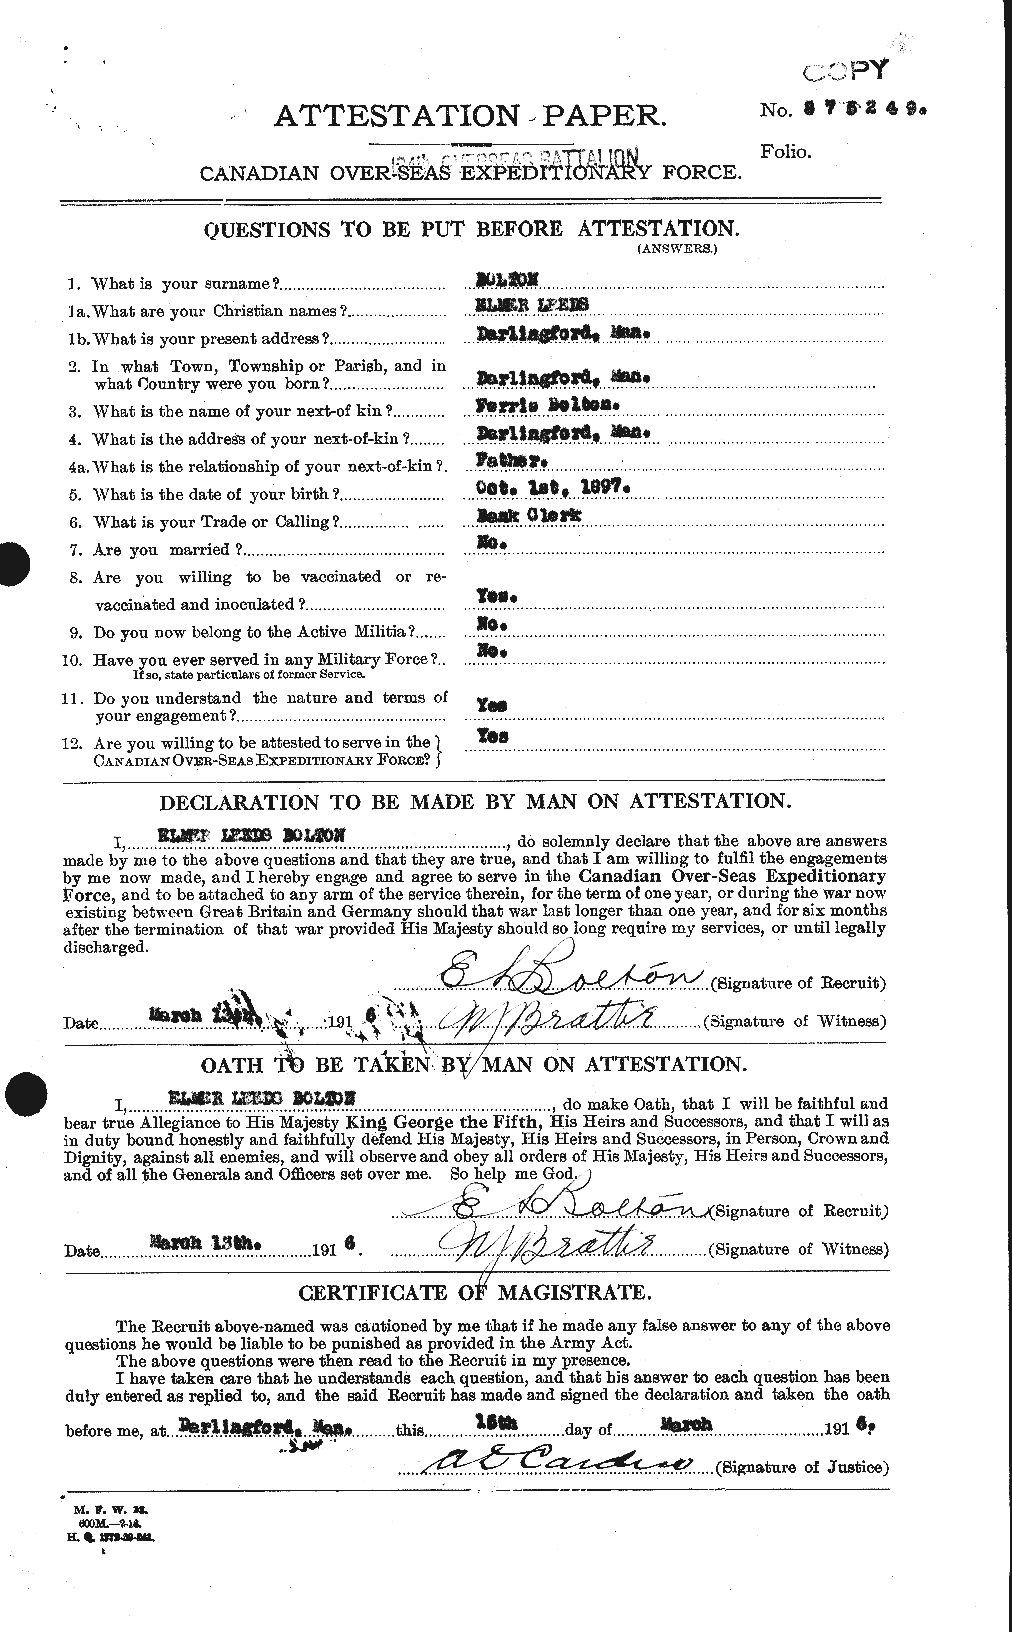 Personnel Records of the First World War - CEF 249999a